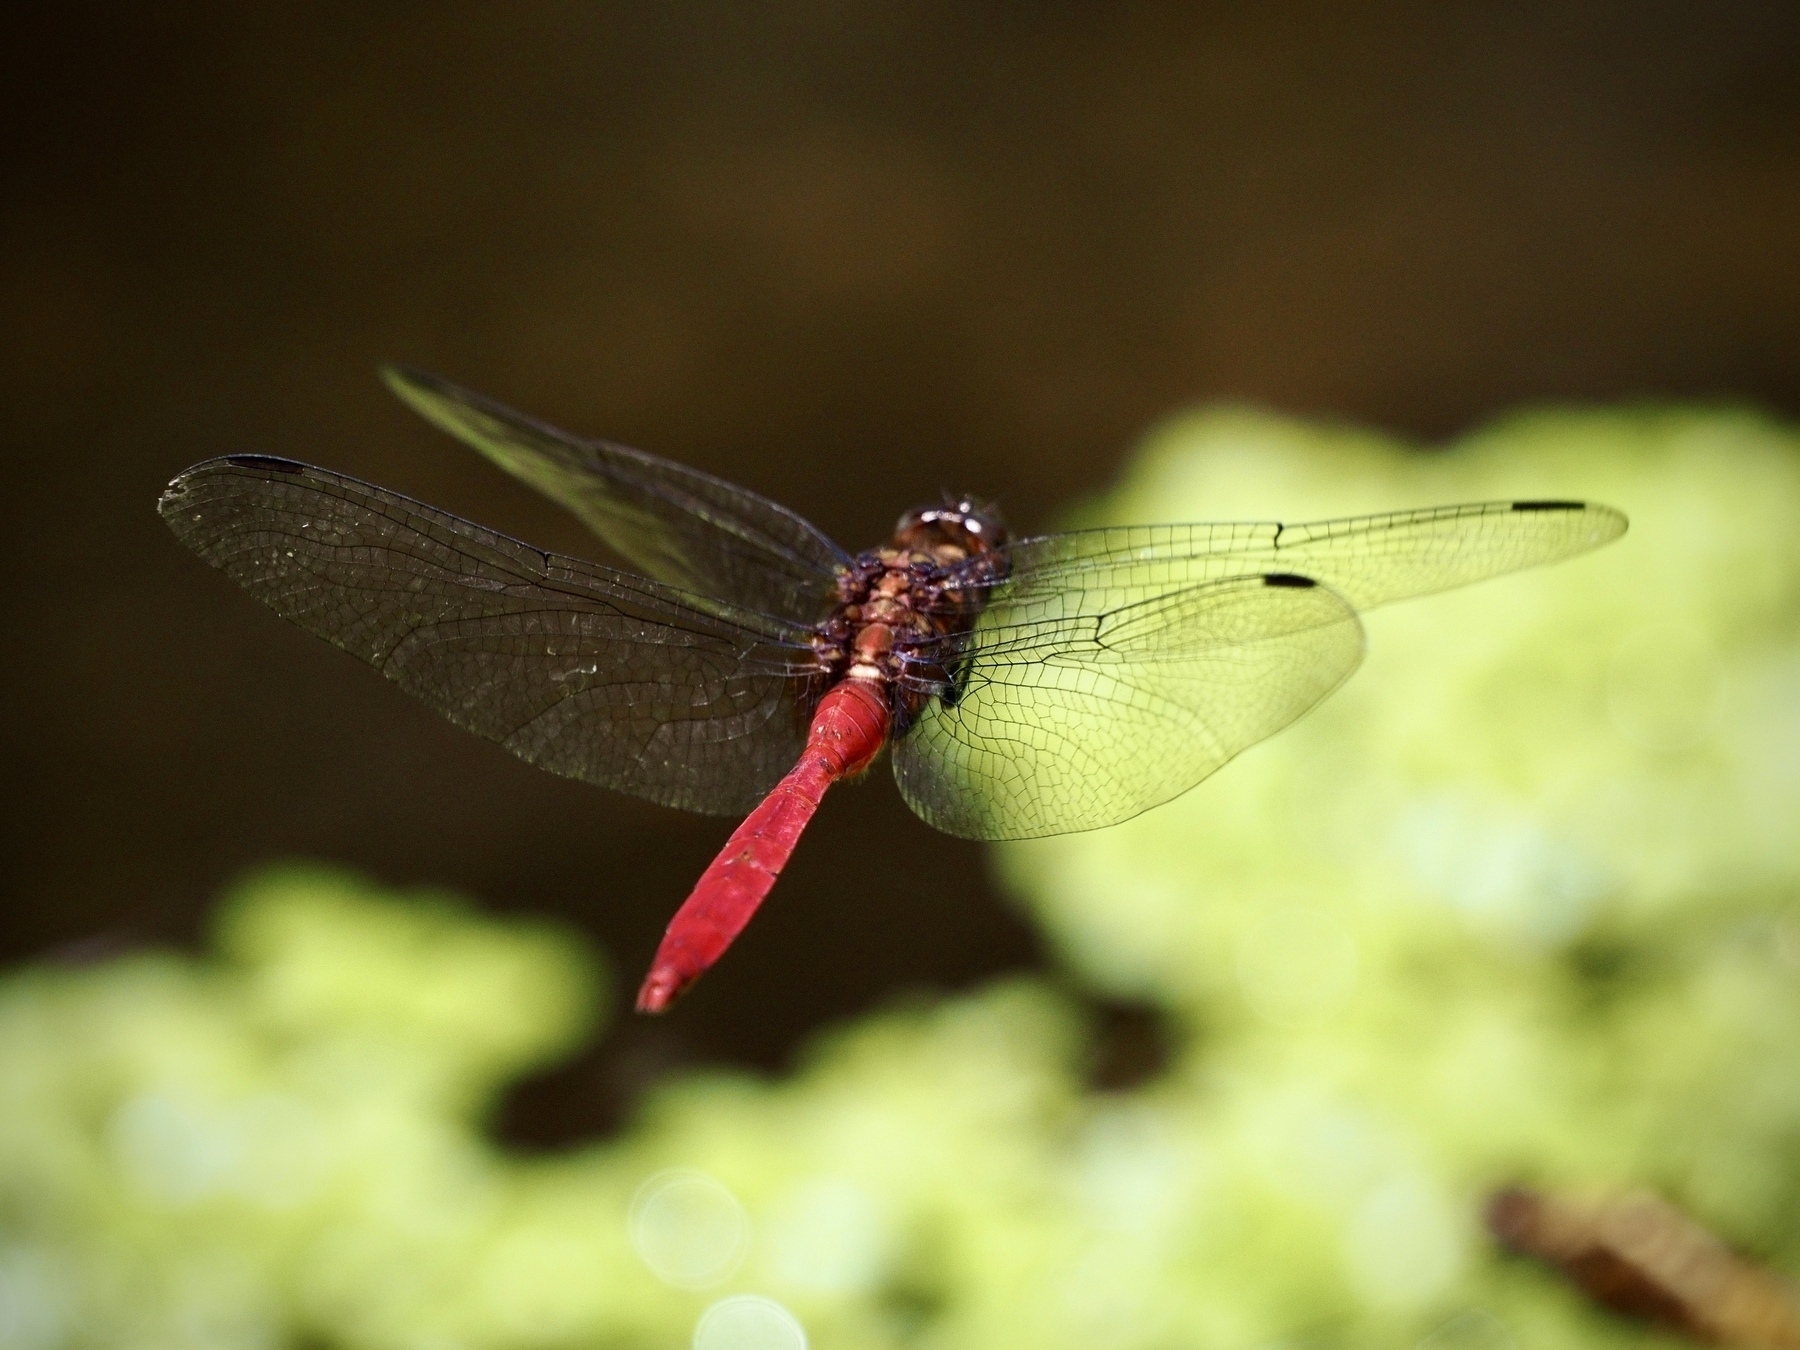 A close-up of a red dragonfly over a pond